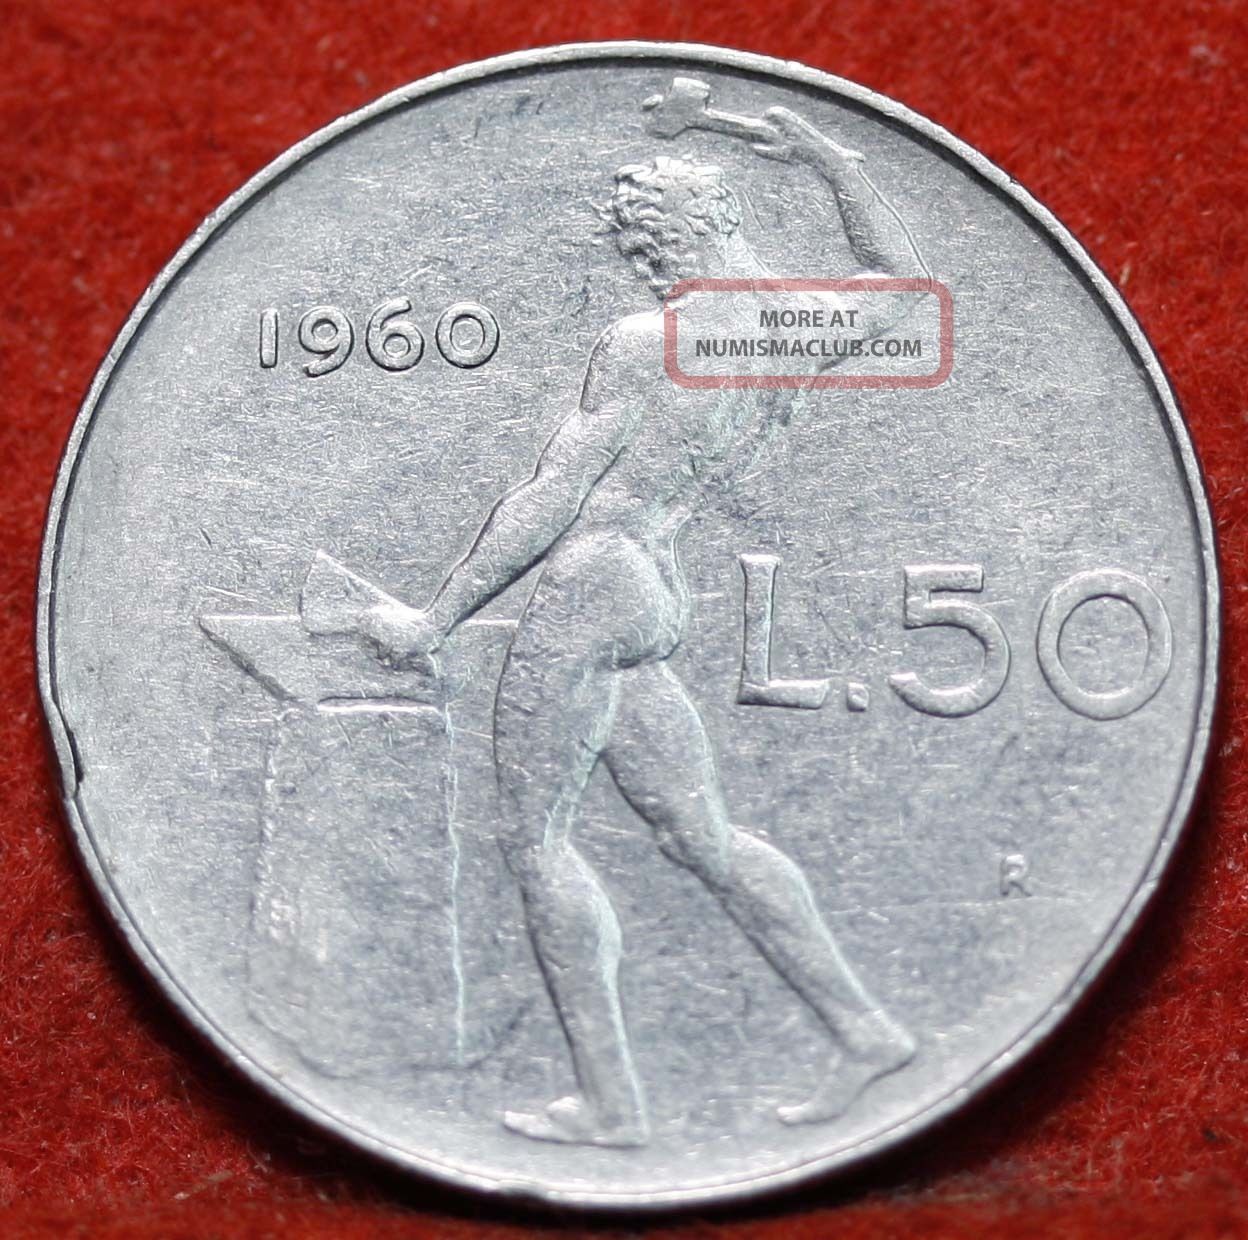 Uncirculated 1960 Italy 50 Lire Aluminum Km95 Foreign Coin S/h